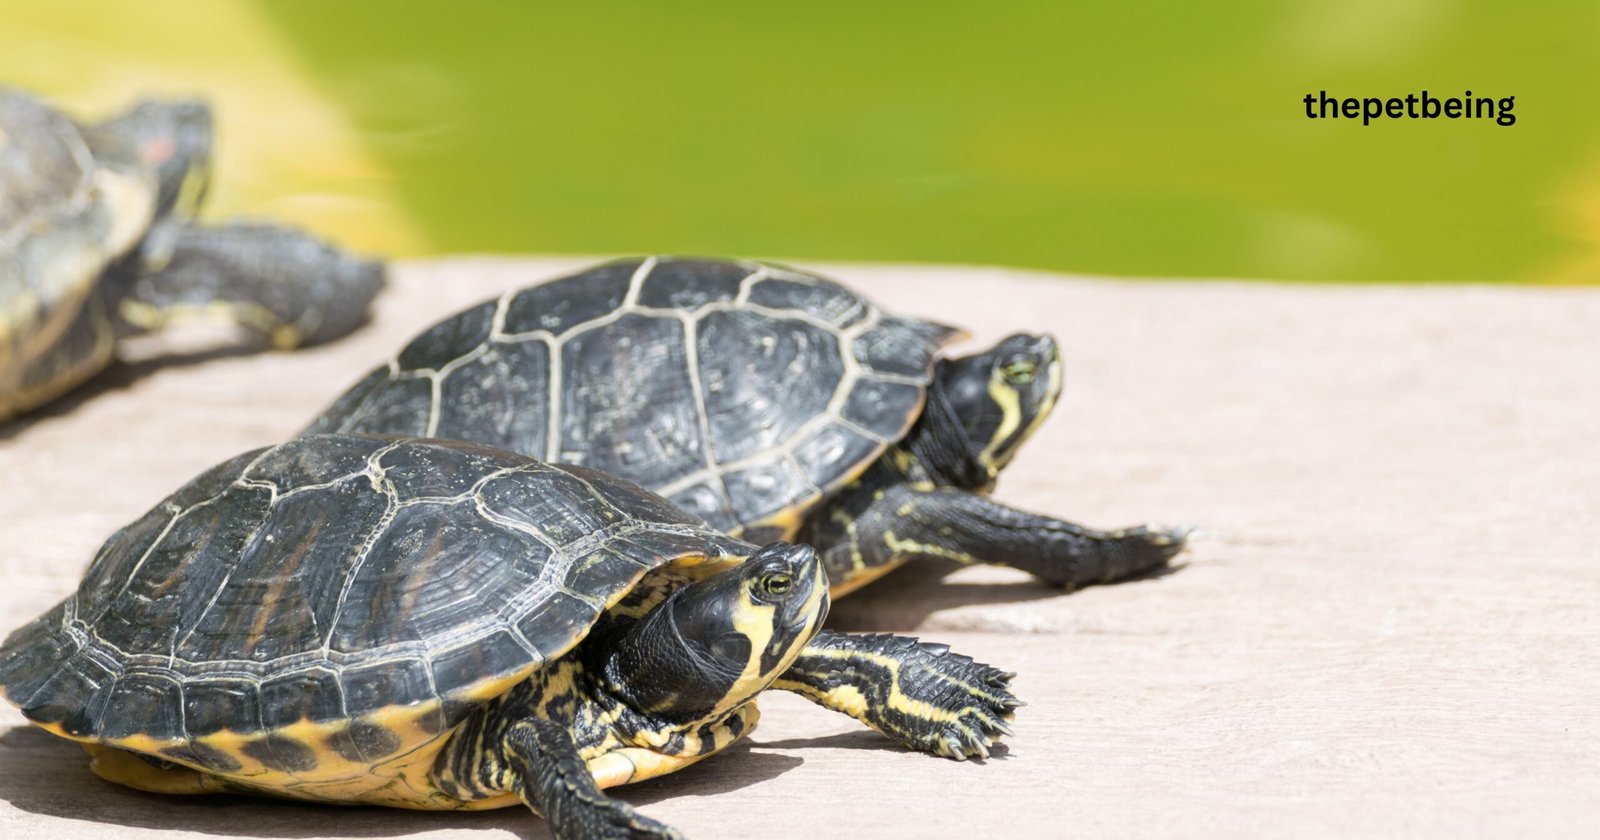 How To Take Care Of A Small Turtle At Home